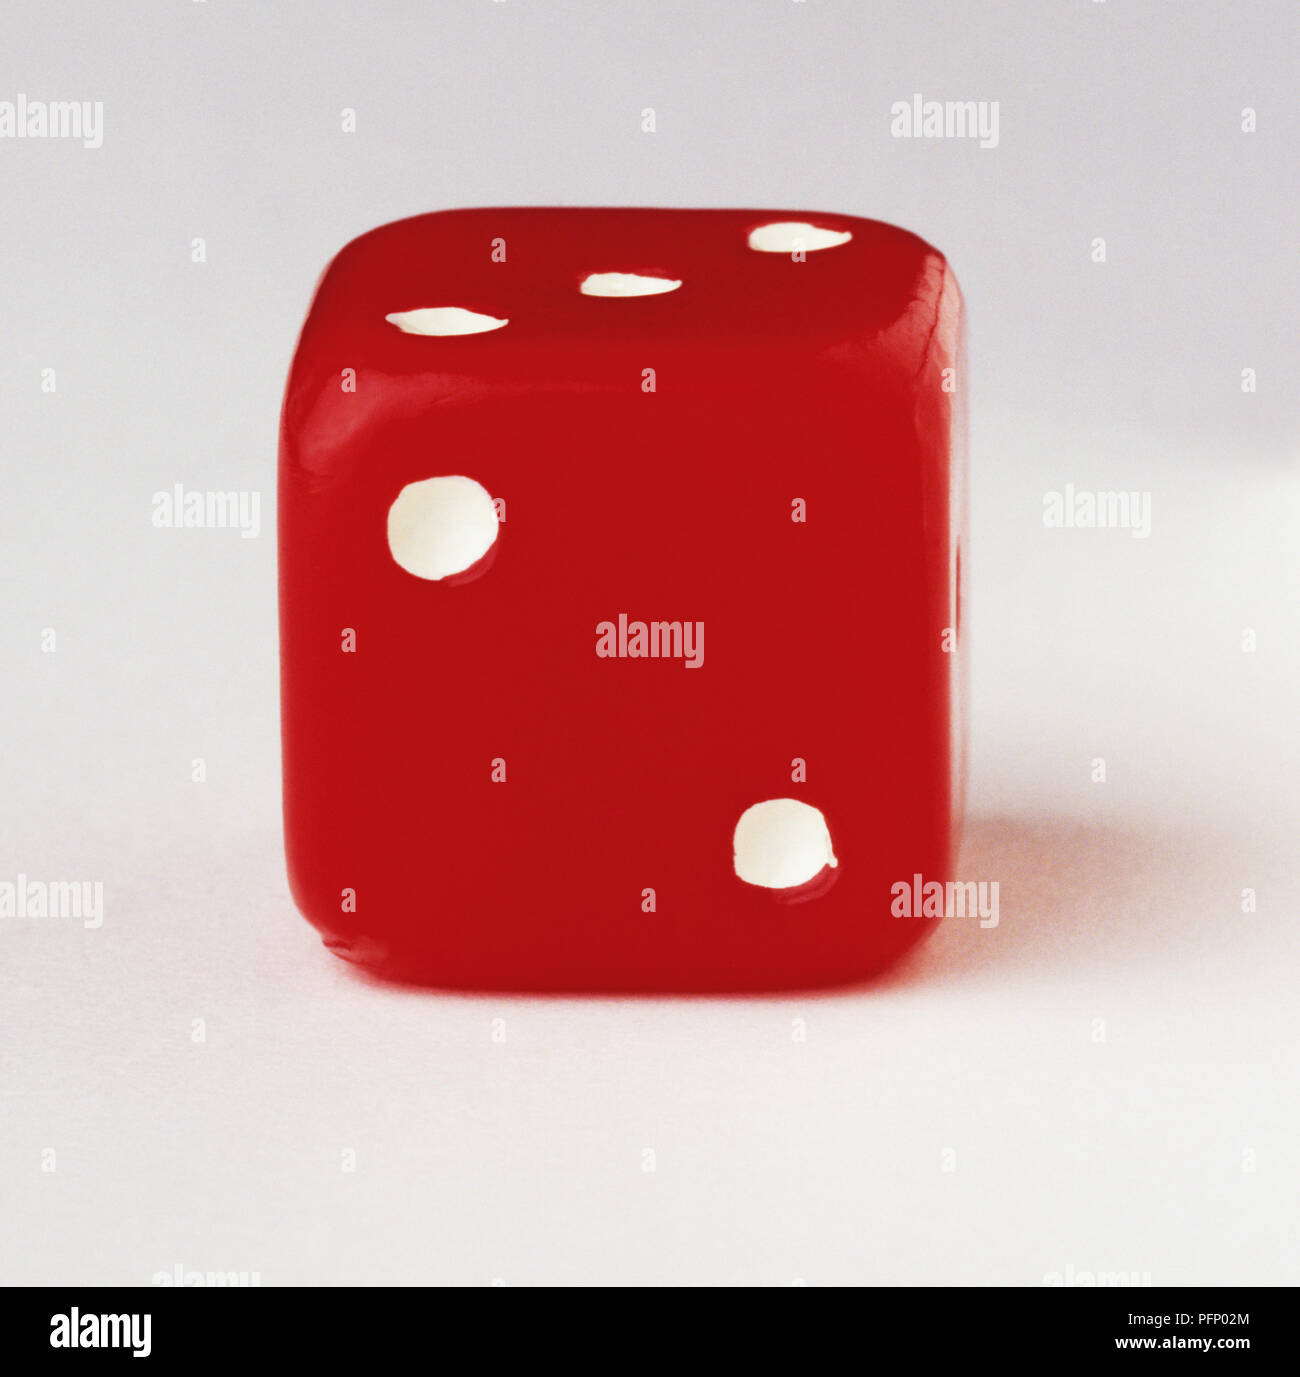 Red dice with two-dot side facing the camera, close up Stock Photo